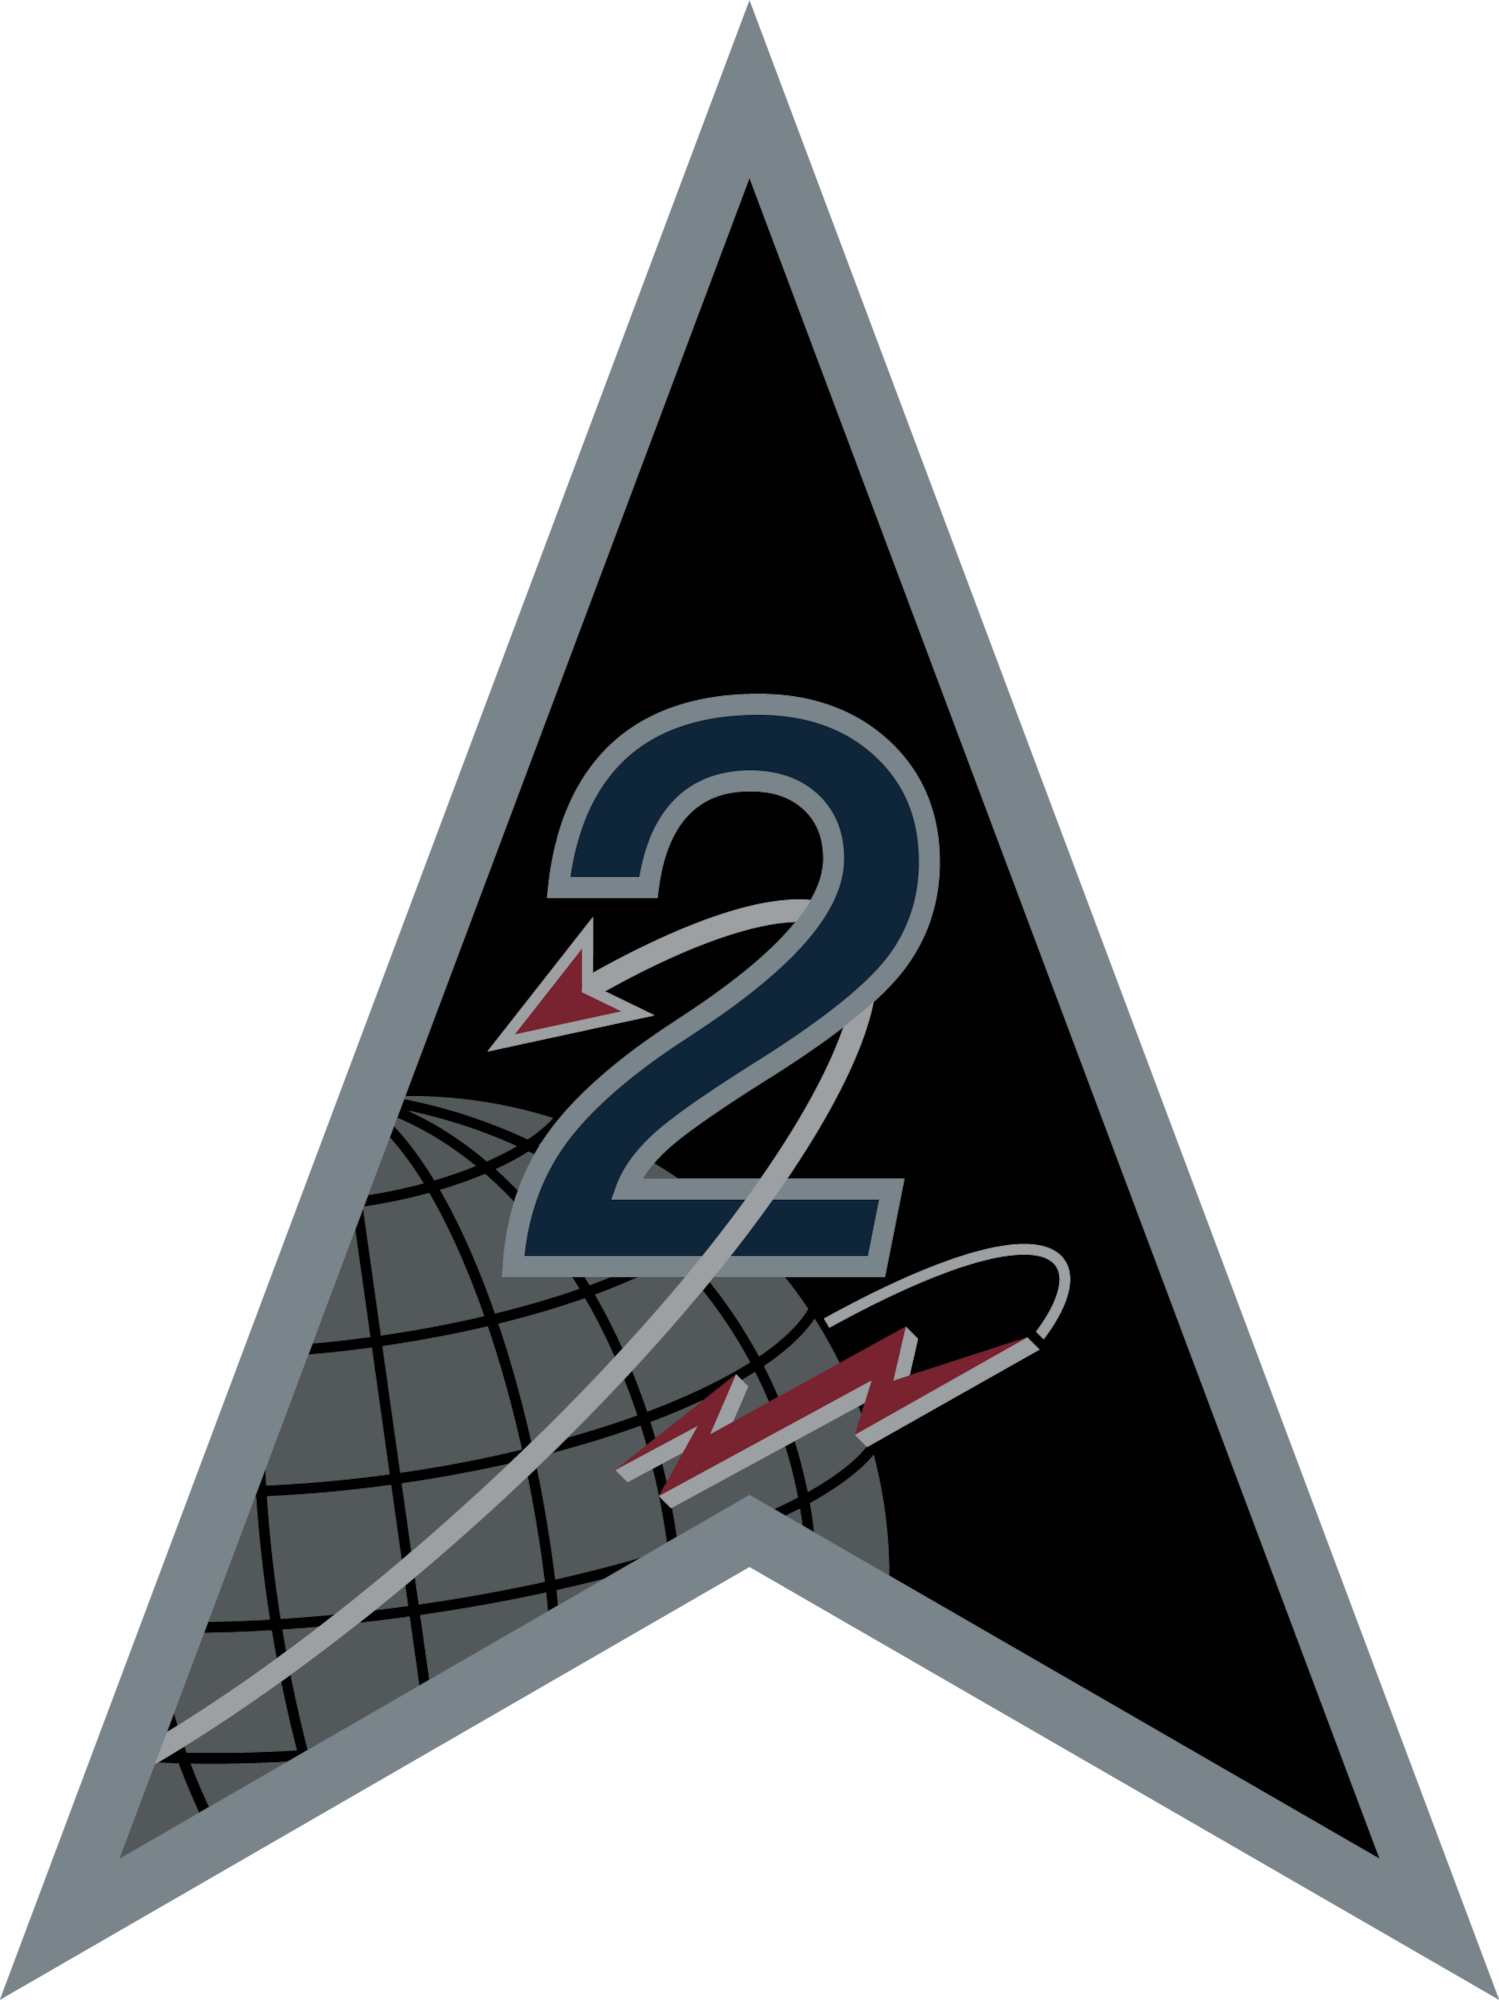 The official logo for Space Delta 2